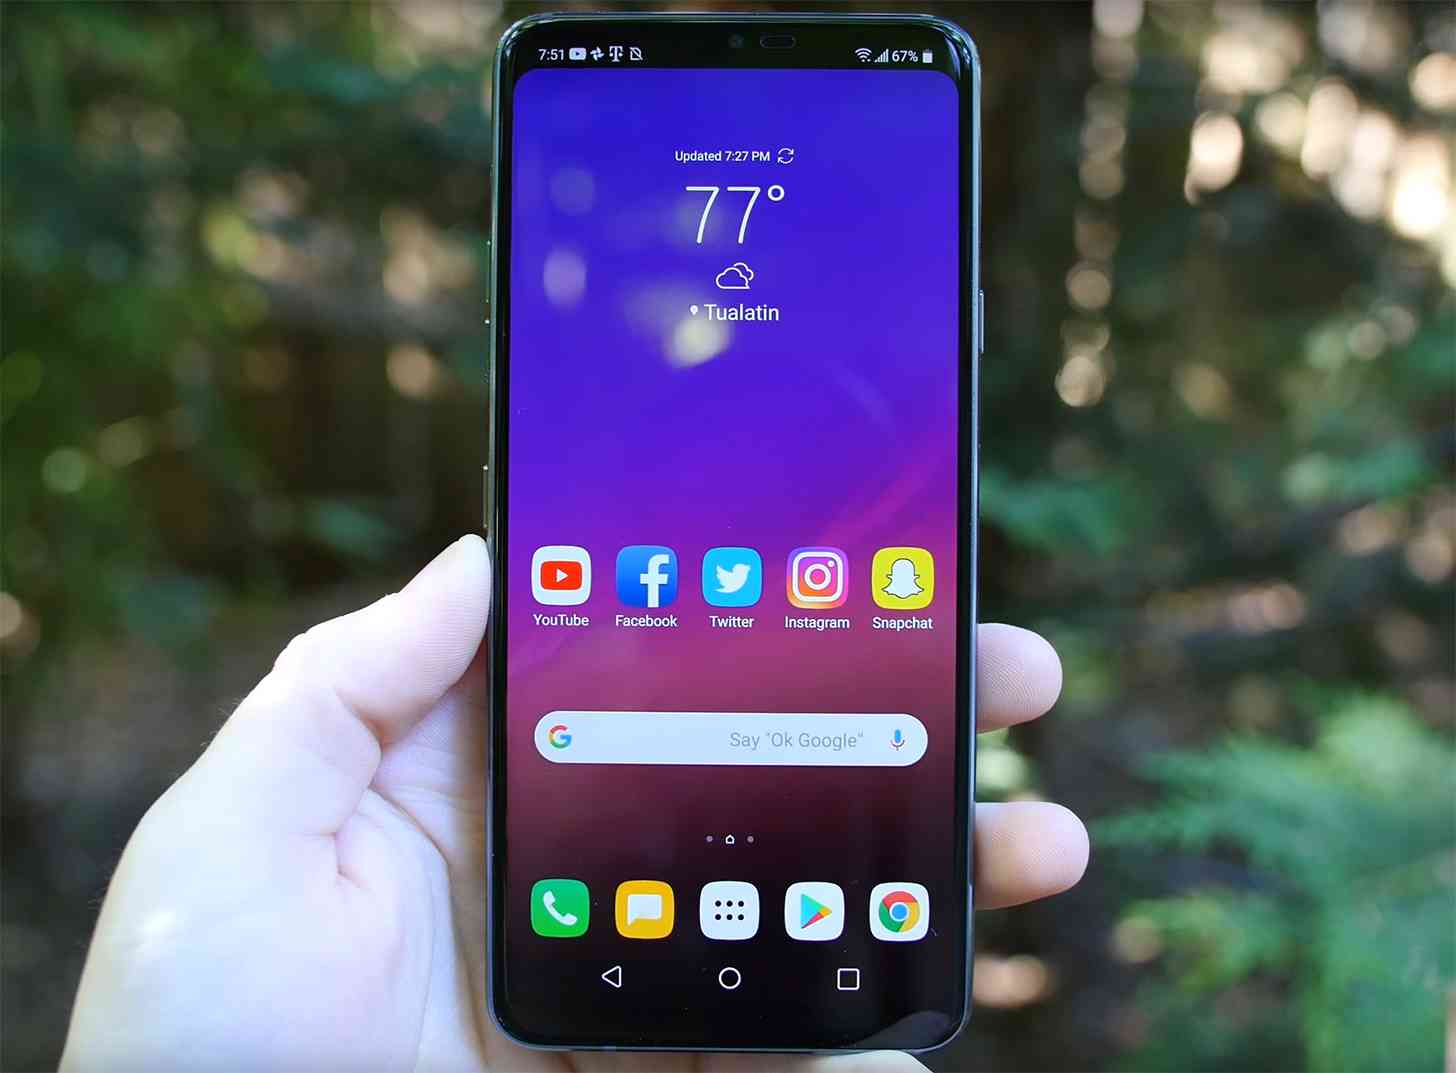 LG G7 ThinQ hands-on video